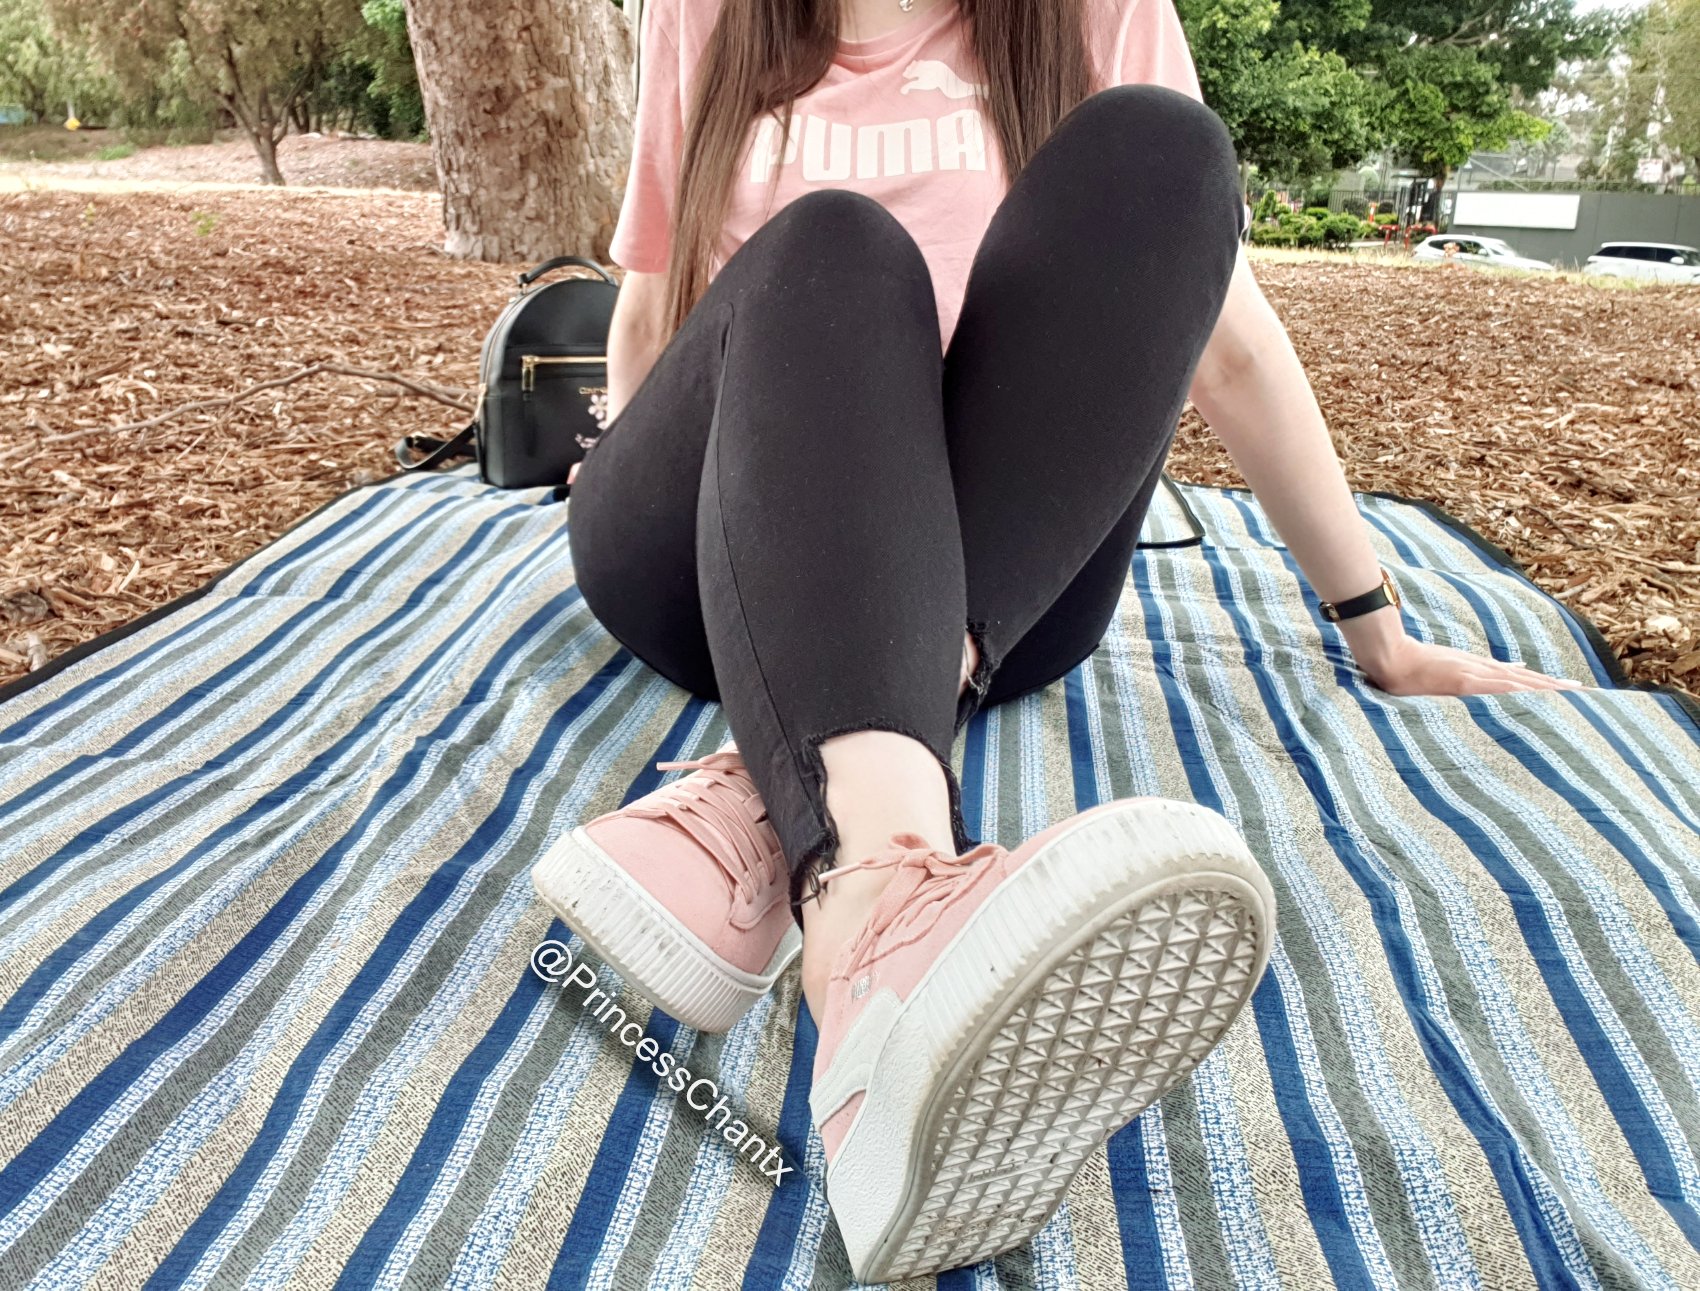 muerto colateral constante Princess Chantel 💋 on Twitter: "I've spent the day walking around in the  park to get my sneakers really dirty for your mouth. That's right - I  expect you to lick them